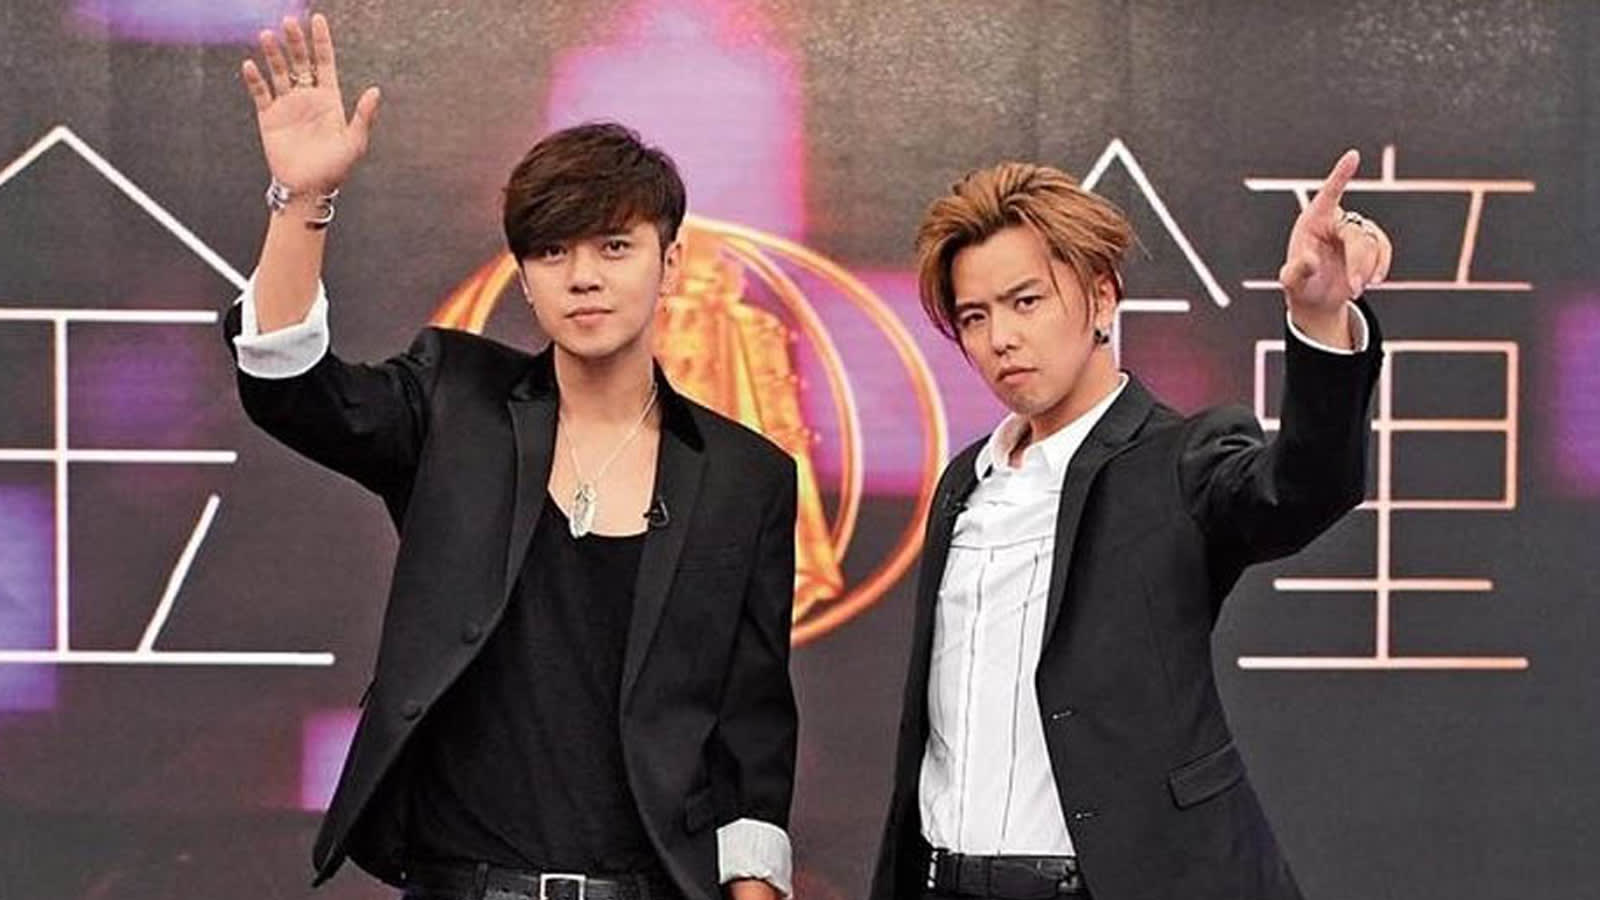 Alien Huang Says He Doesn’t Have Show Luo’s Number Even Though They Hosted The Same Show For Years And Are In The Same Clique